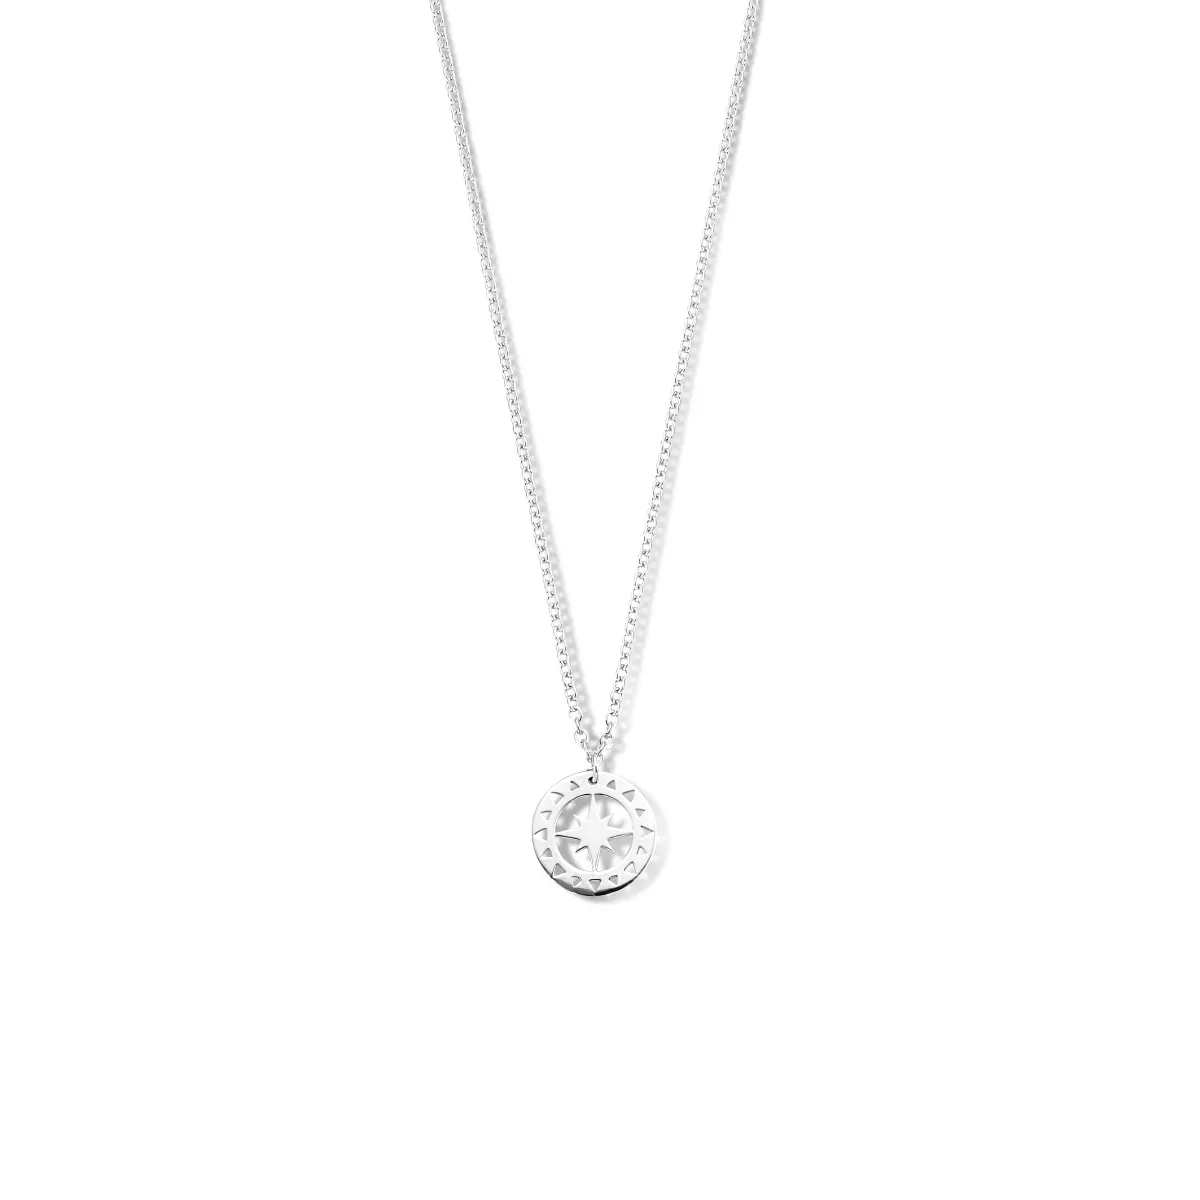 Ketting Ster zilver 1,5 mm 42 + 3 cm